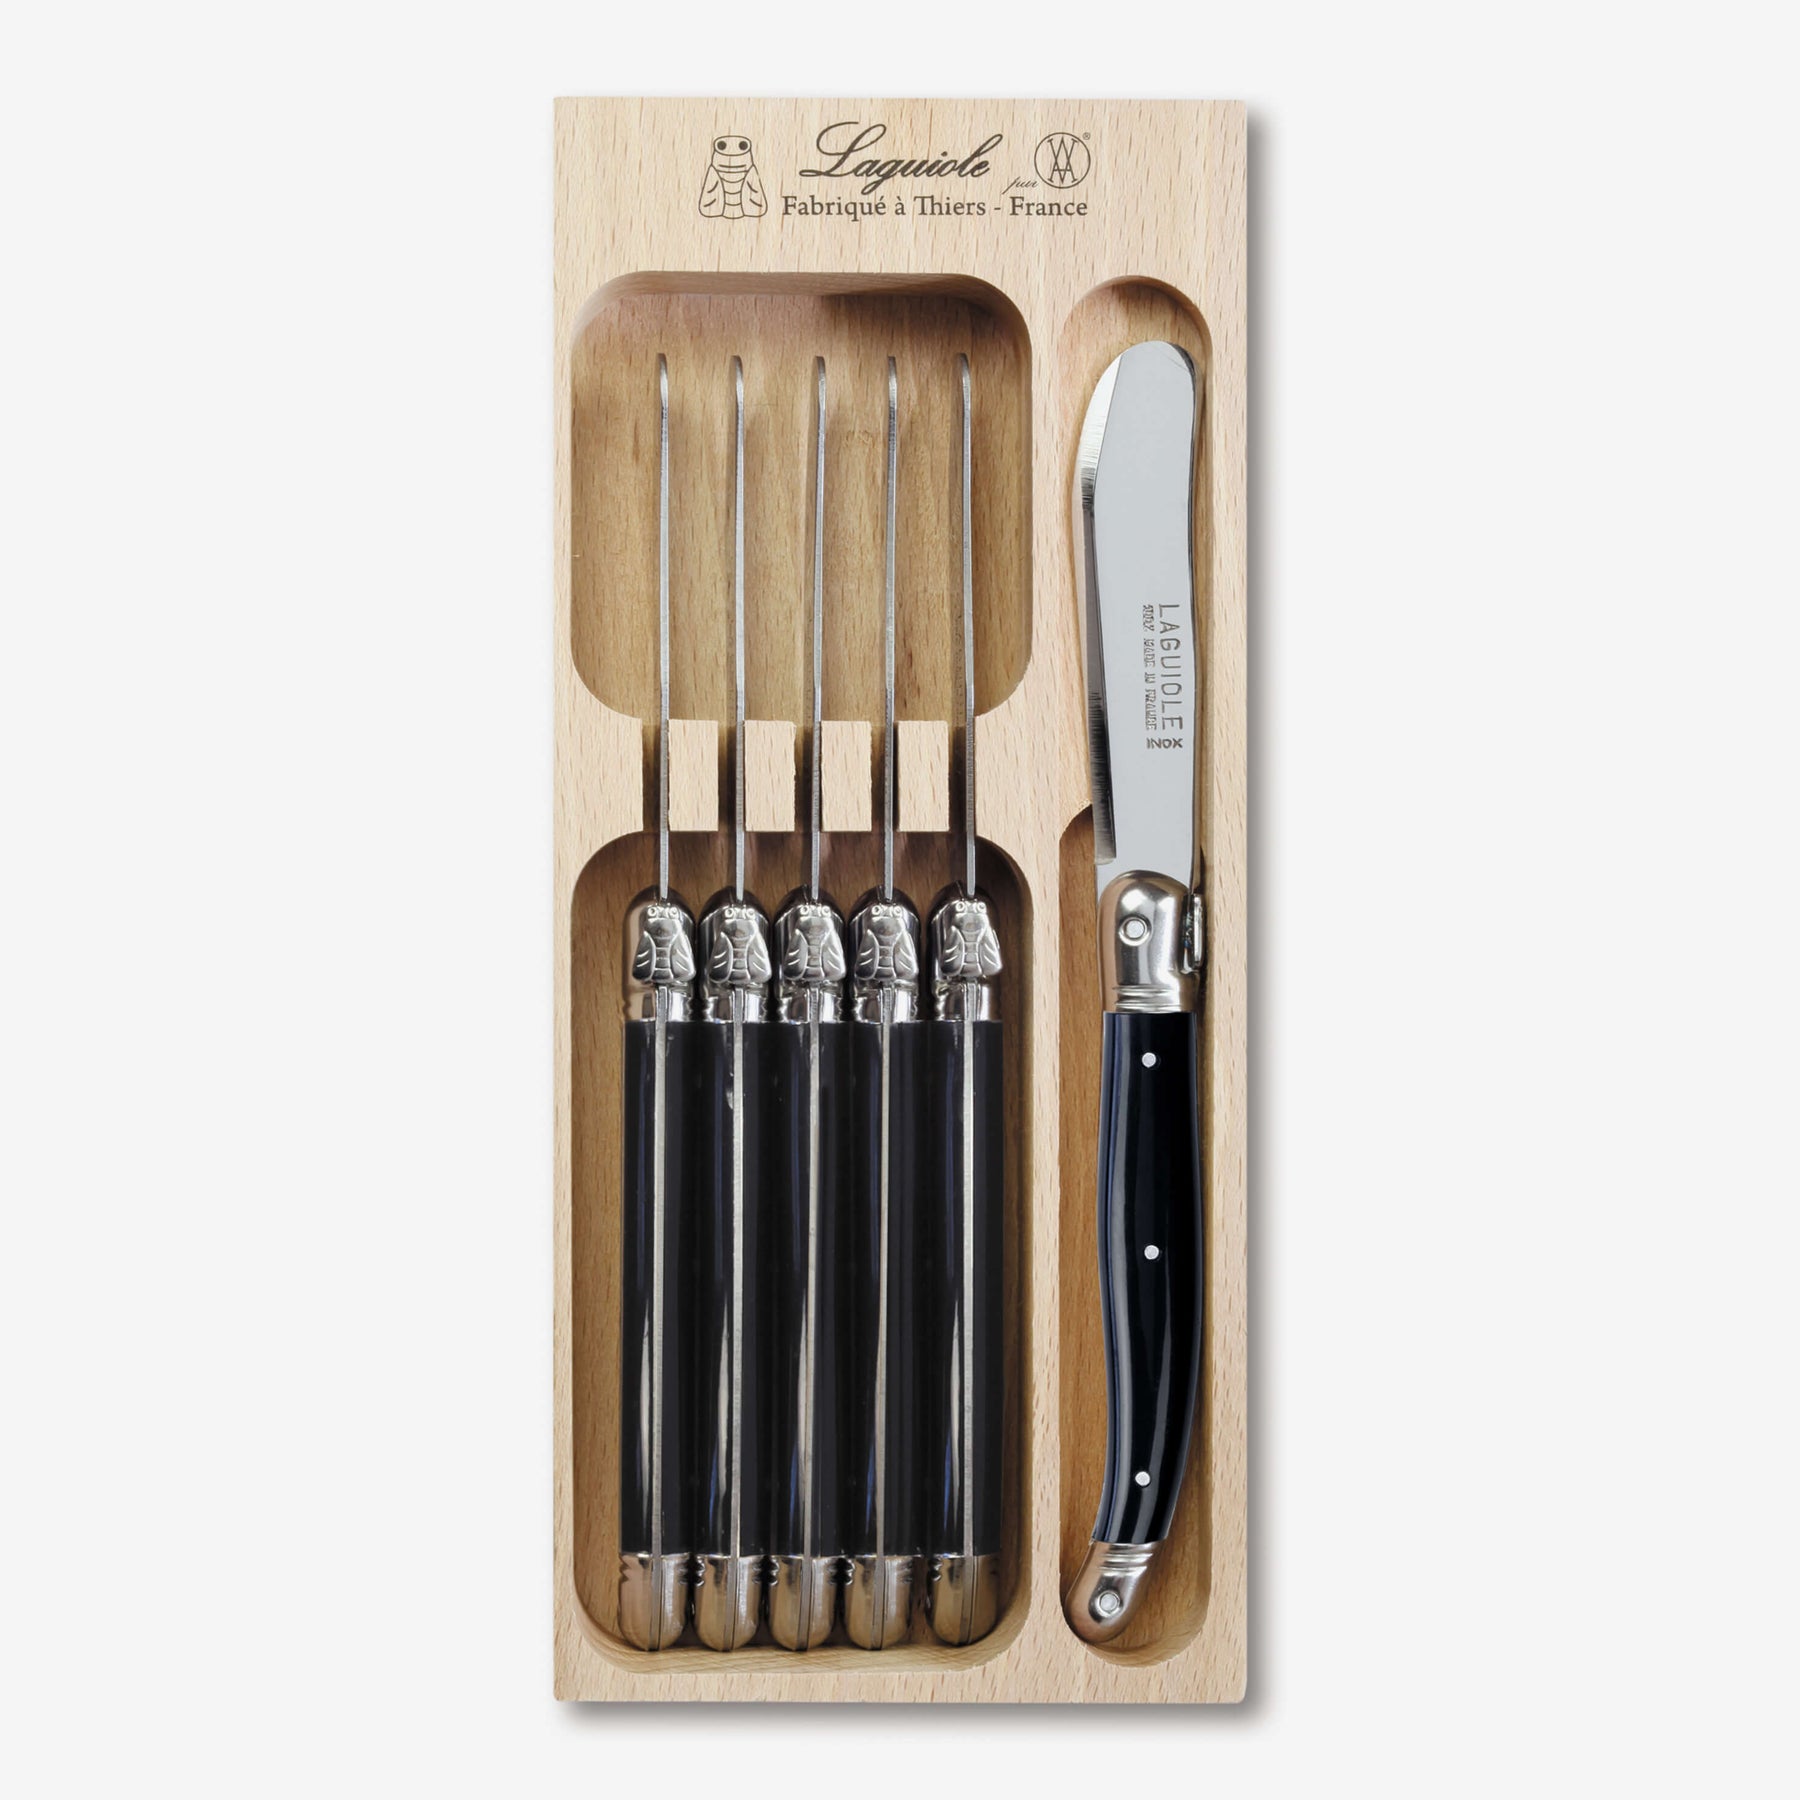 6 Piece Butter Knife Set in Wooden Tray